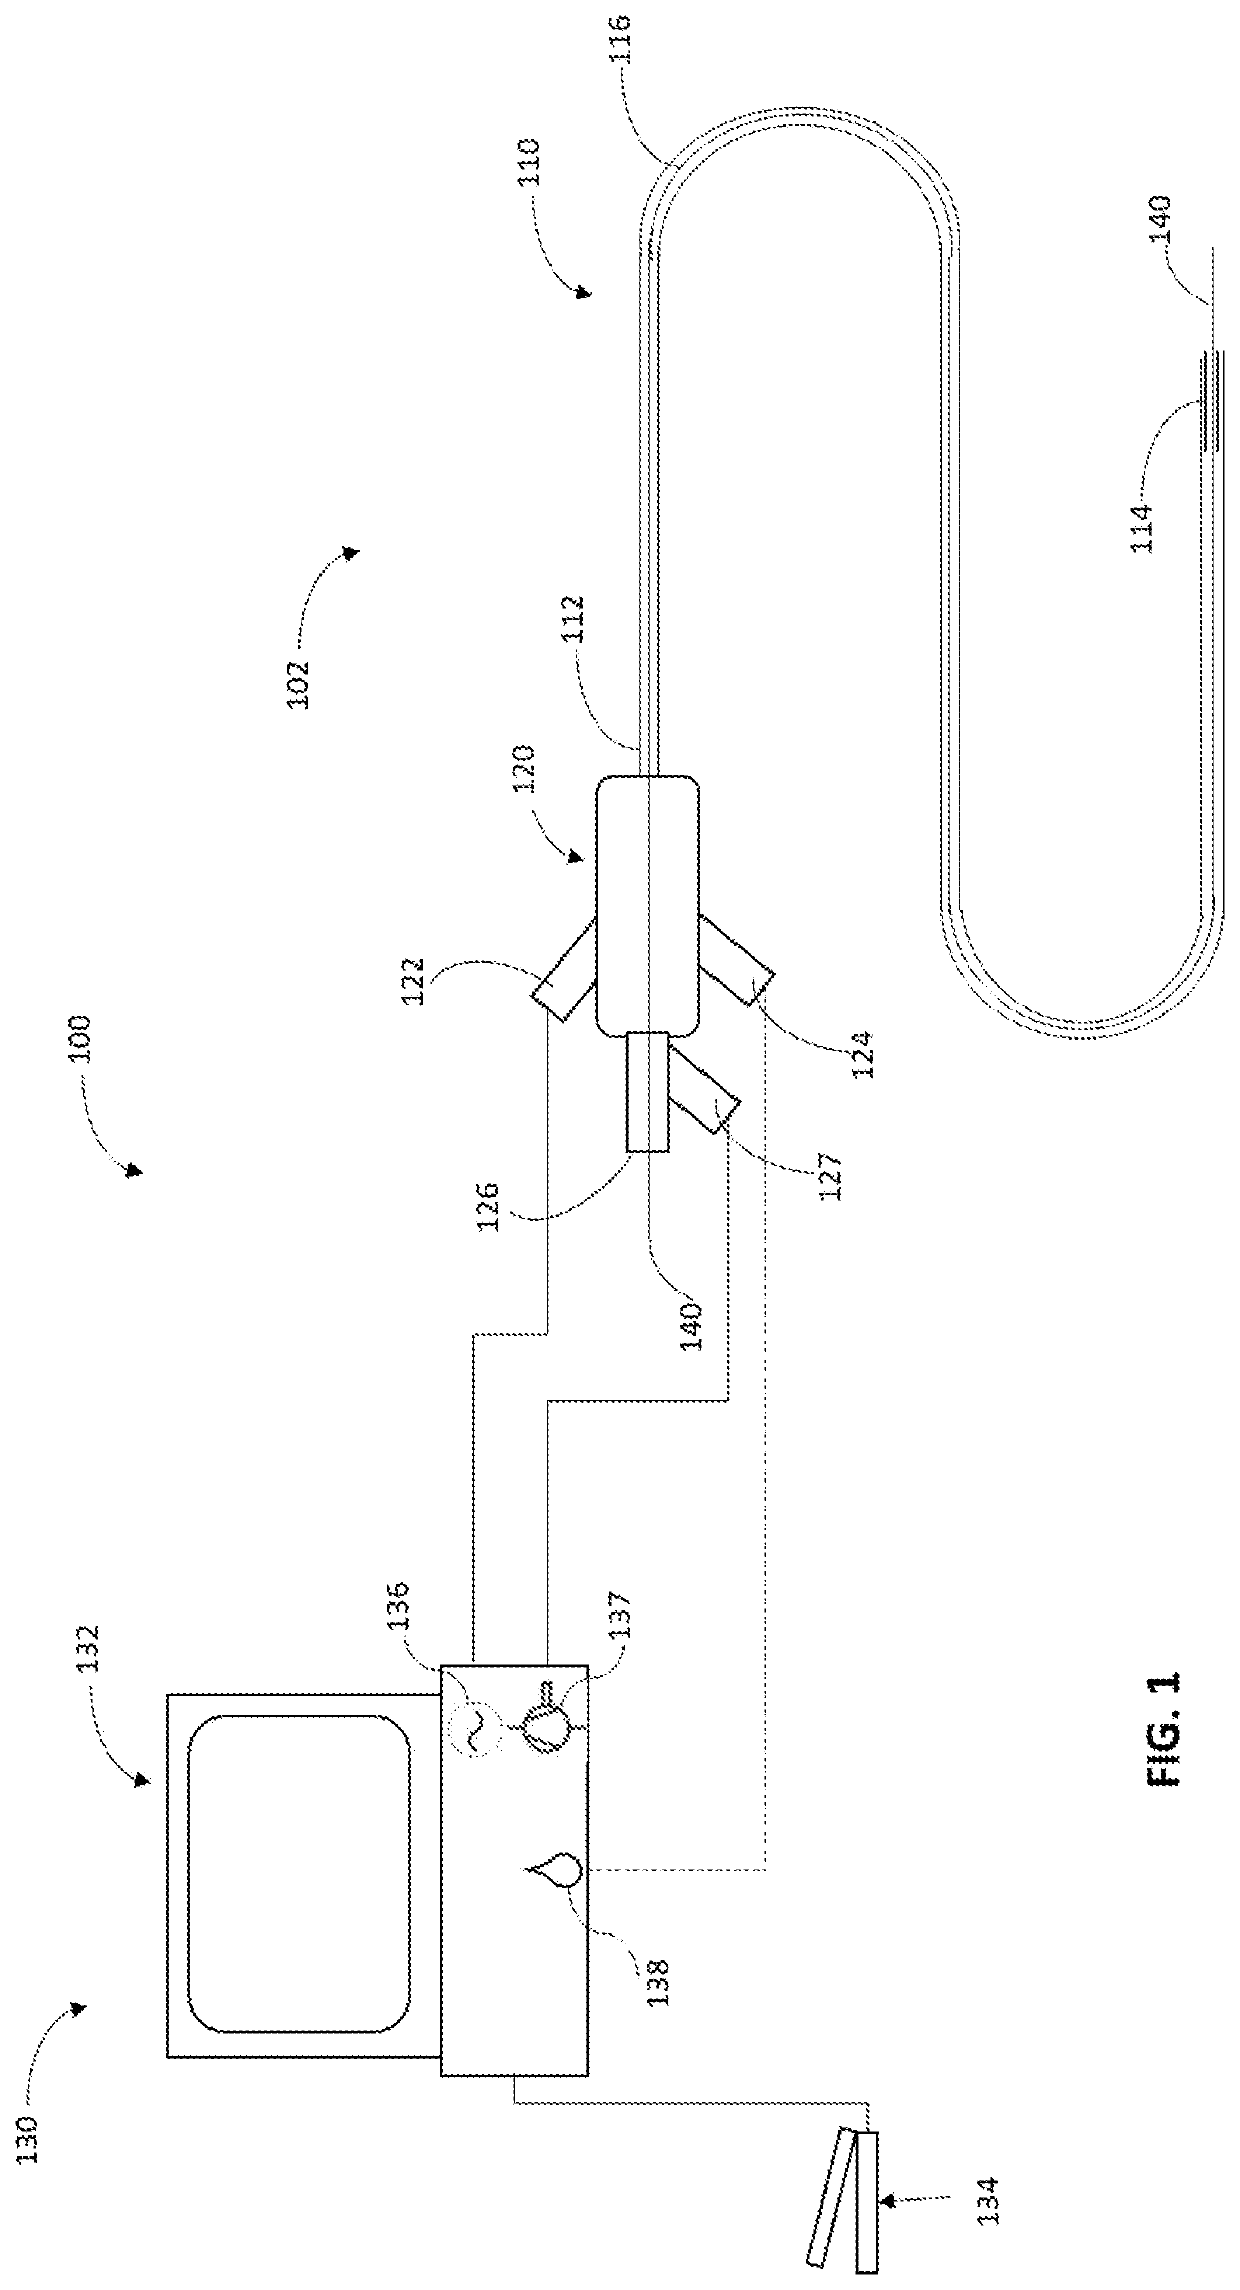 Surgical systems with sesnsing and machine learning capabilities and methods thereof